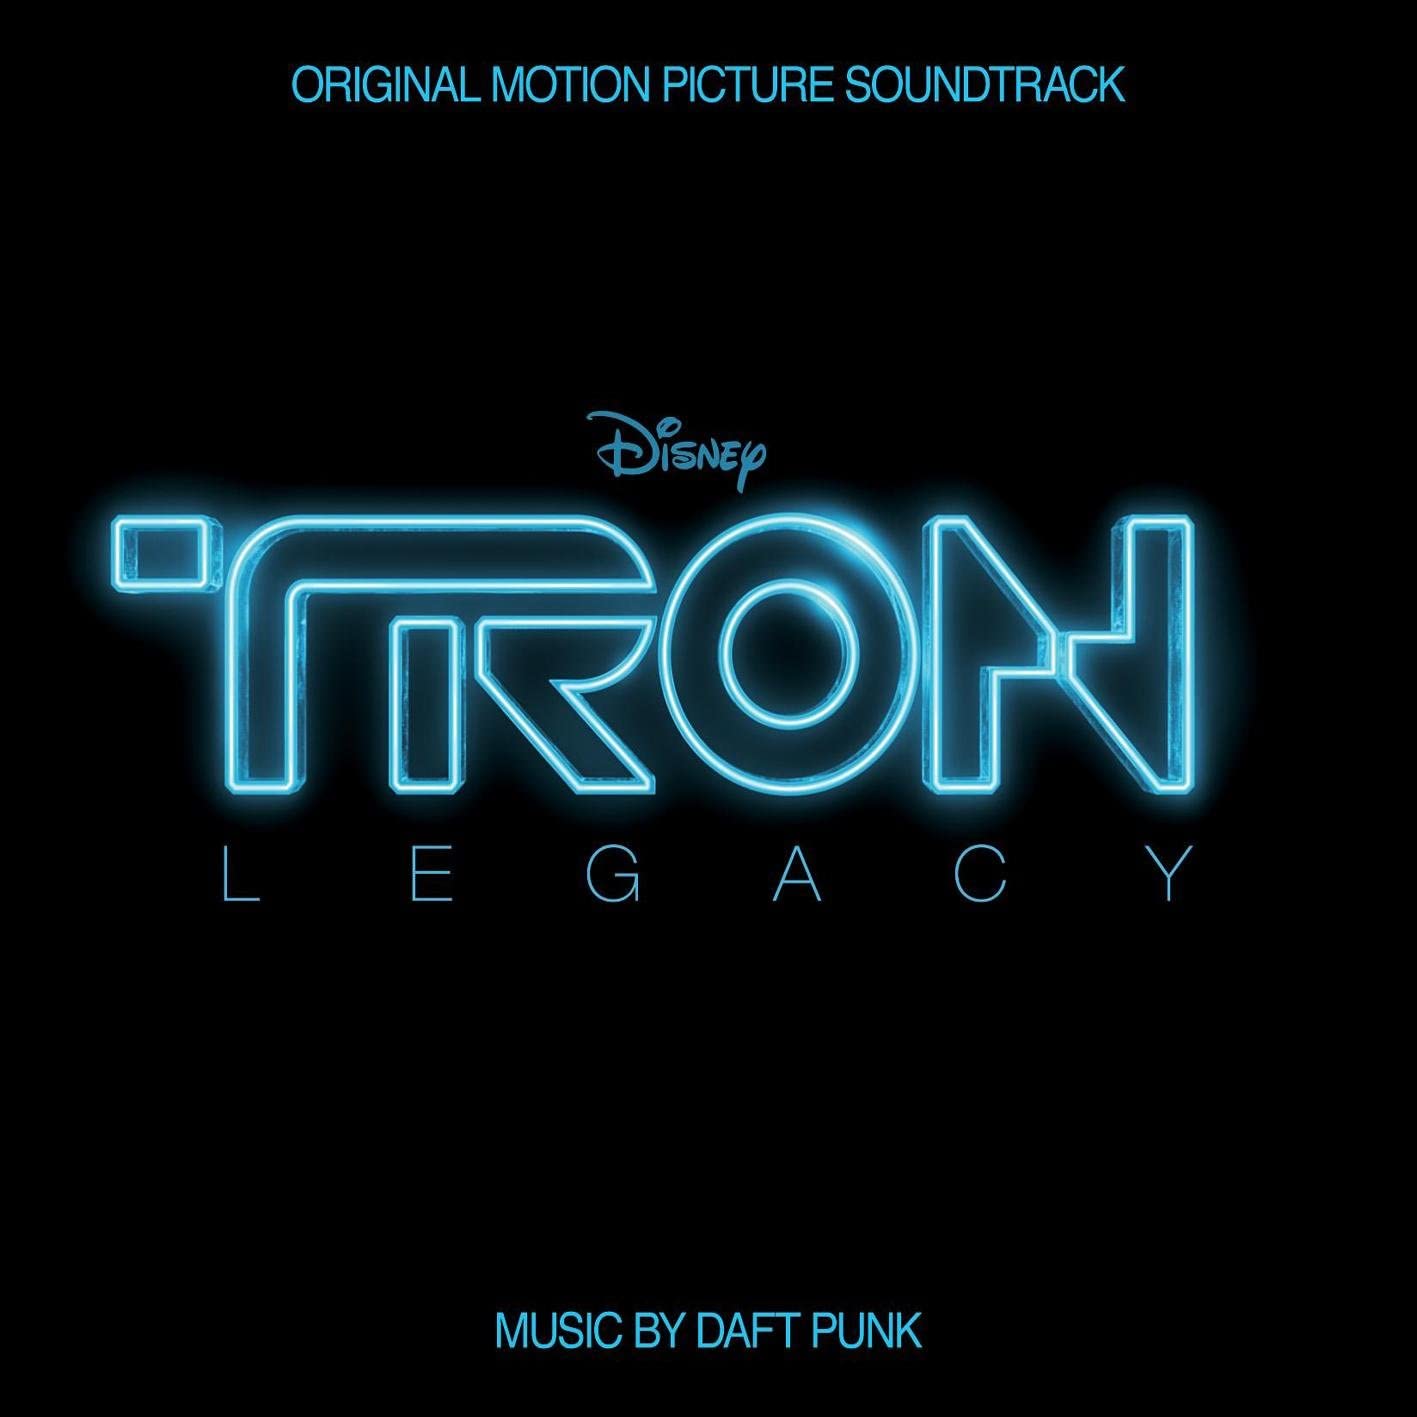 BSO "TRON Legacy by Daft Punk"